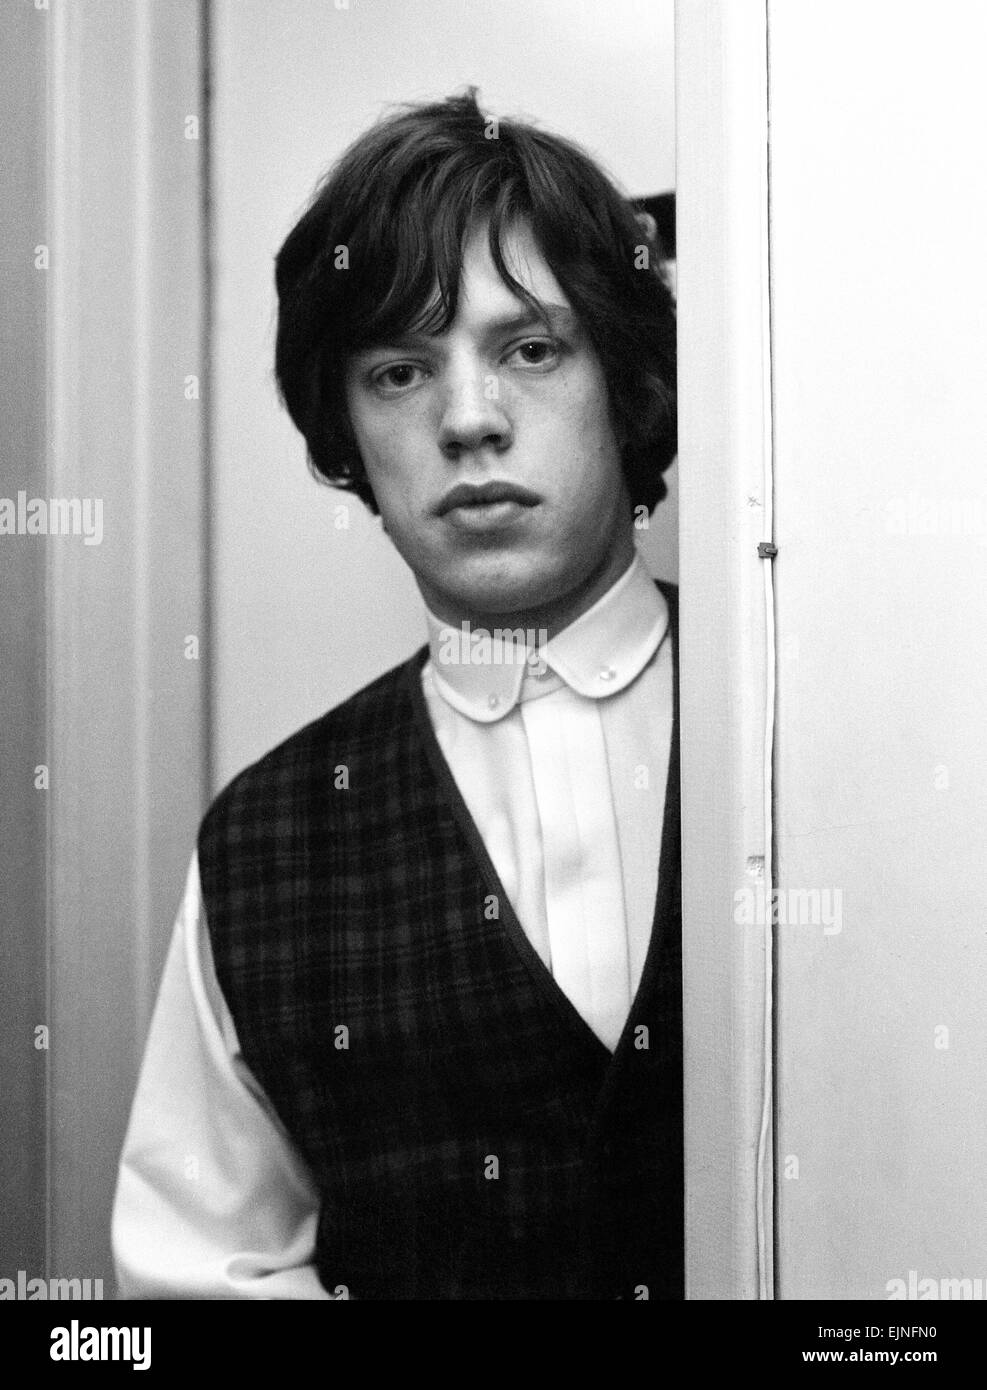 1960's The Rolling Stones Large Photo Refrigerator Magnet sixties mick jagger 